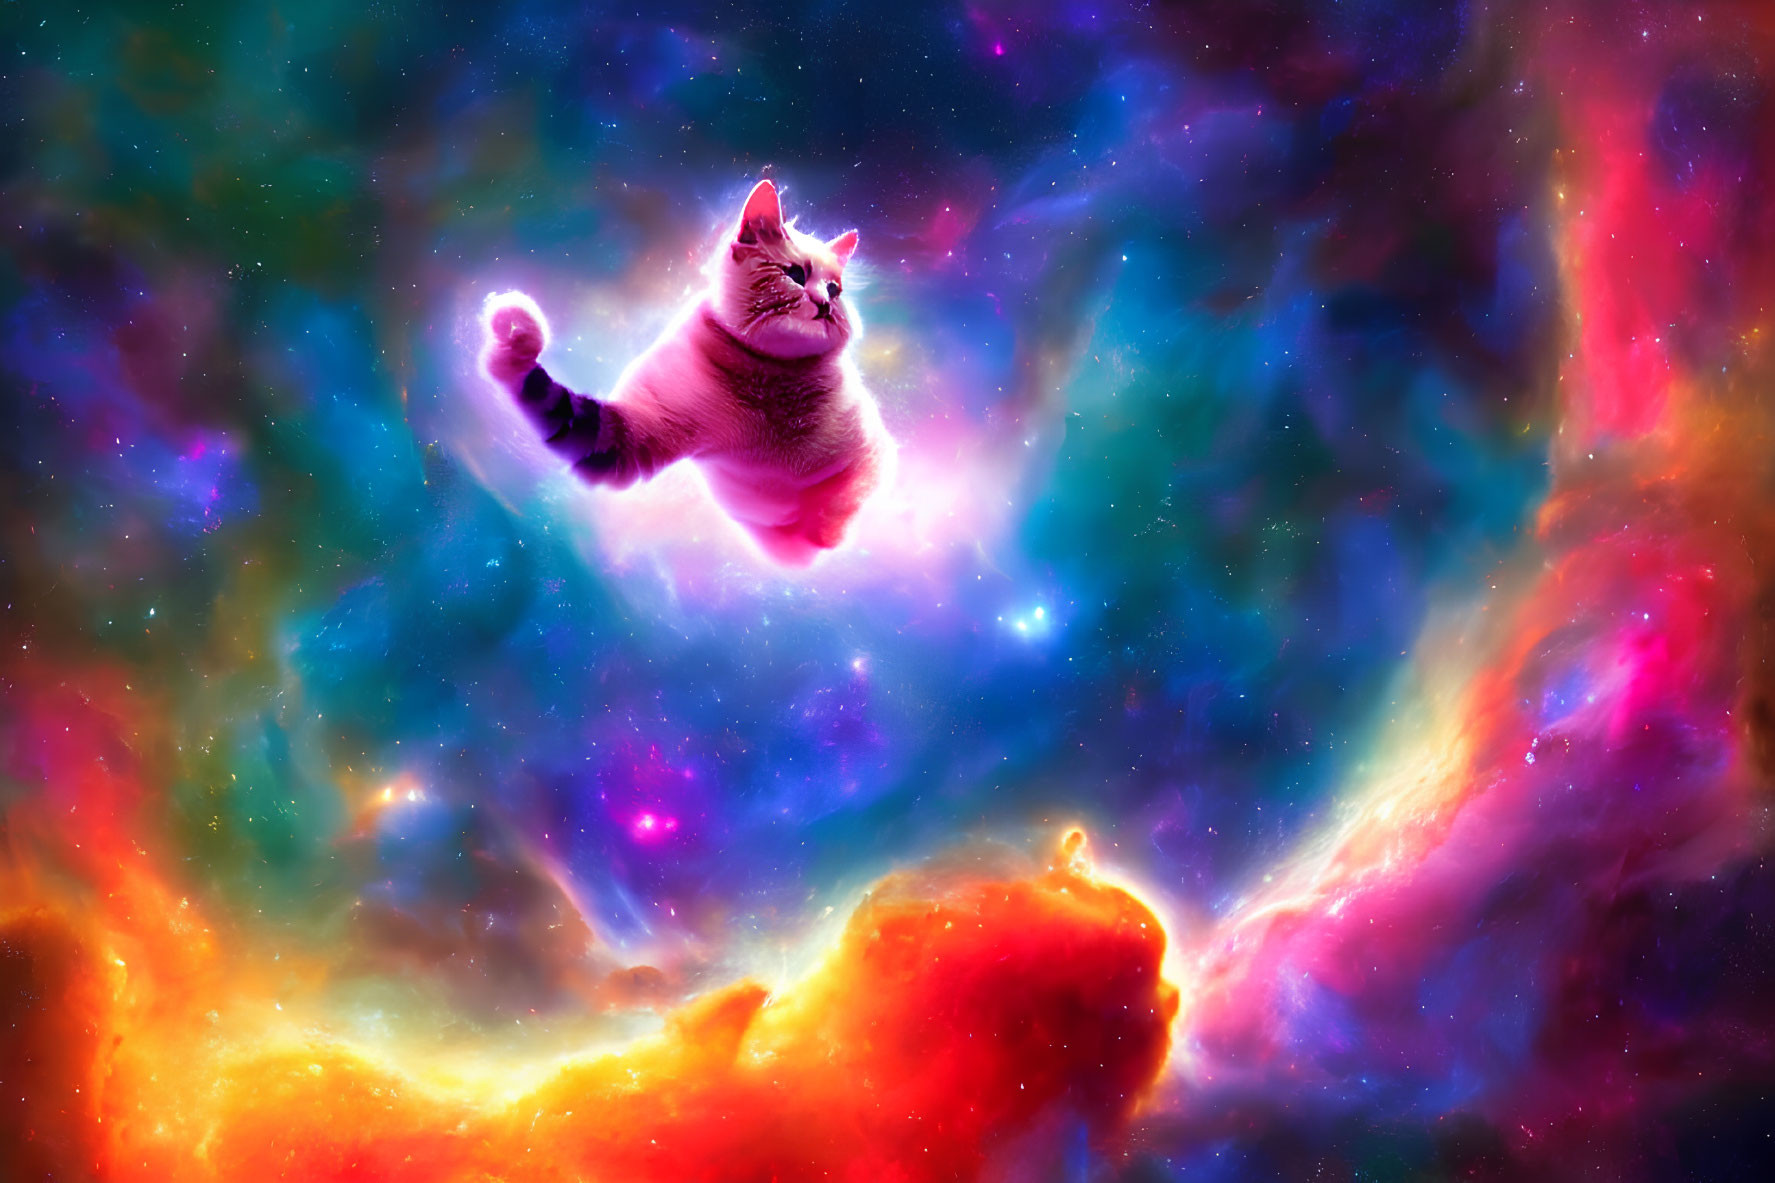 Tabby cat floating in colorful nebula with sparkling stars